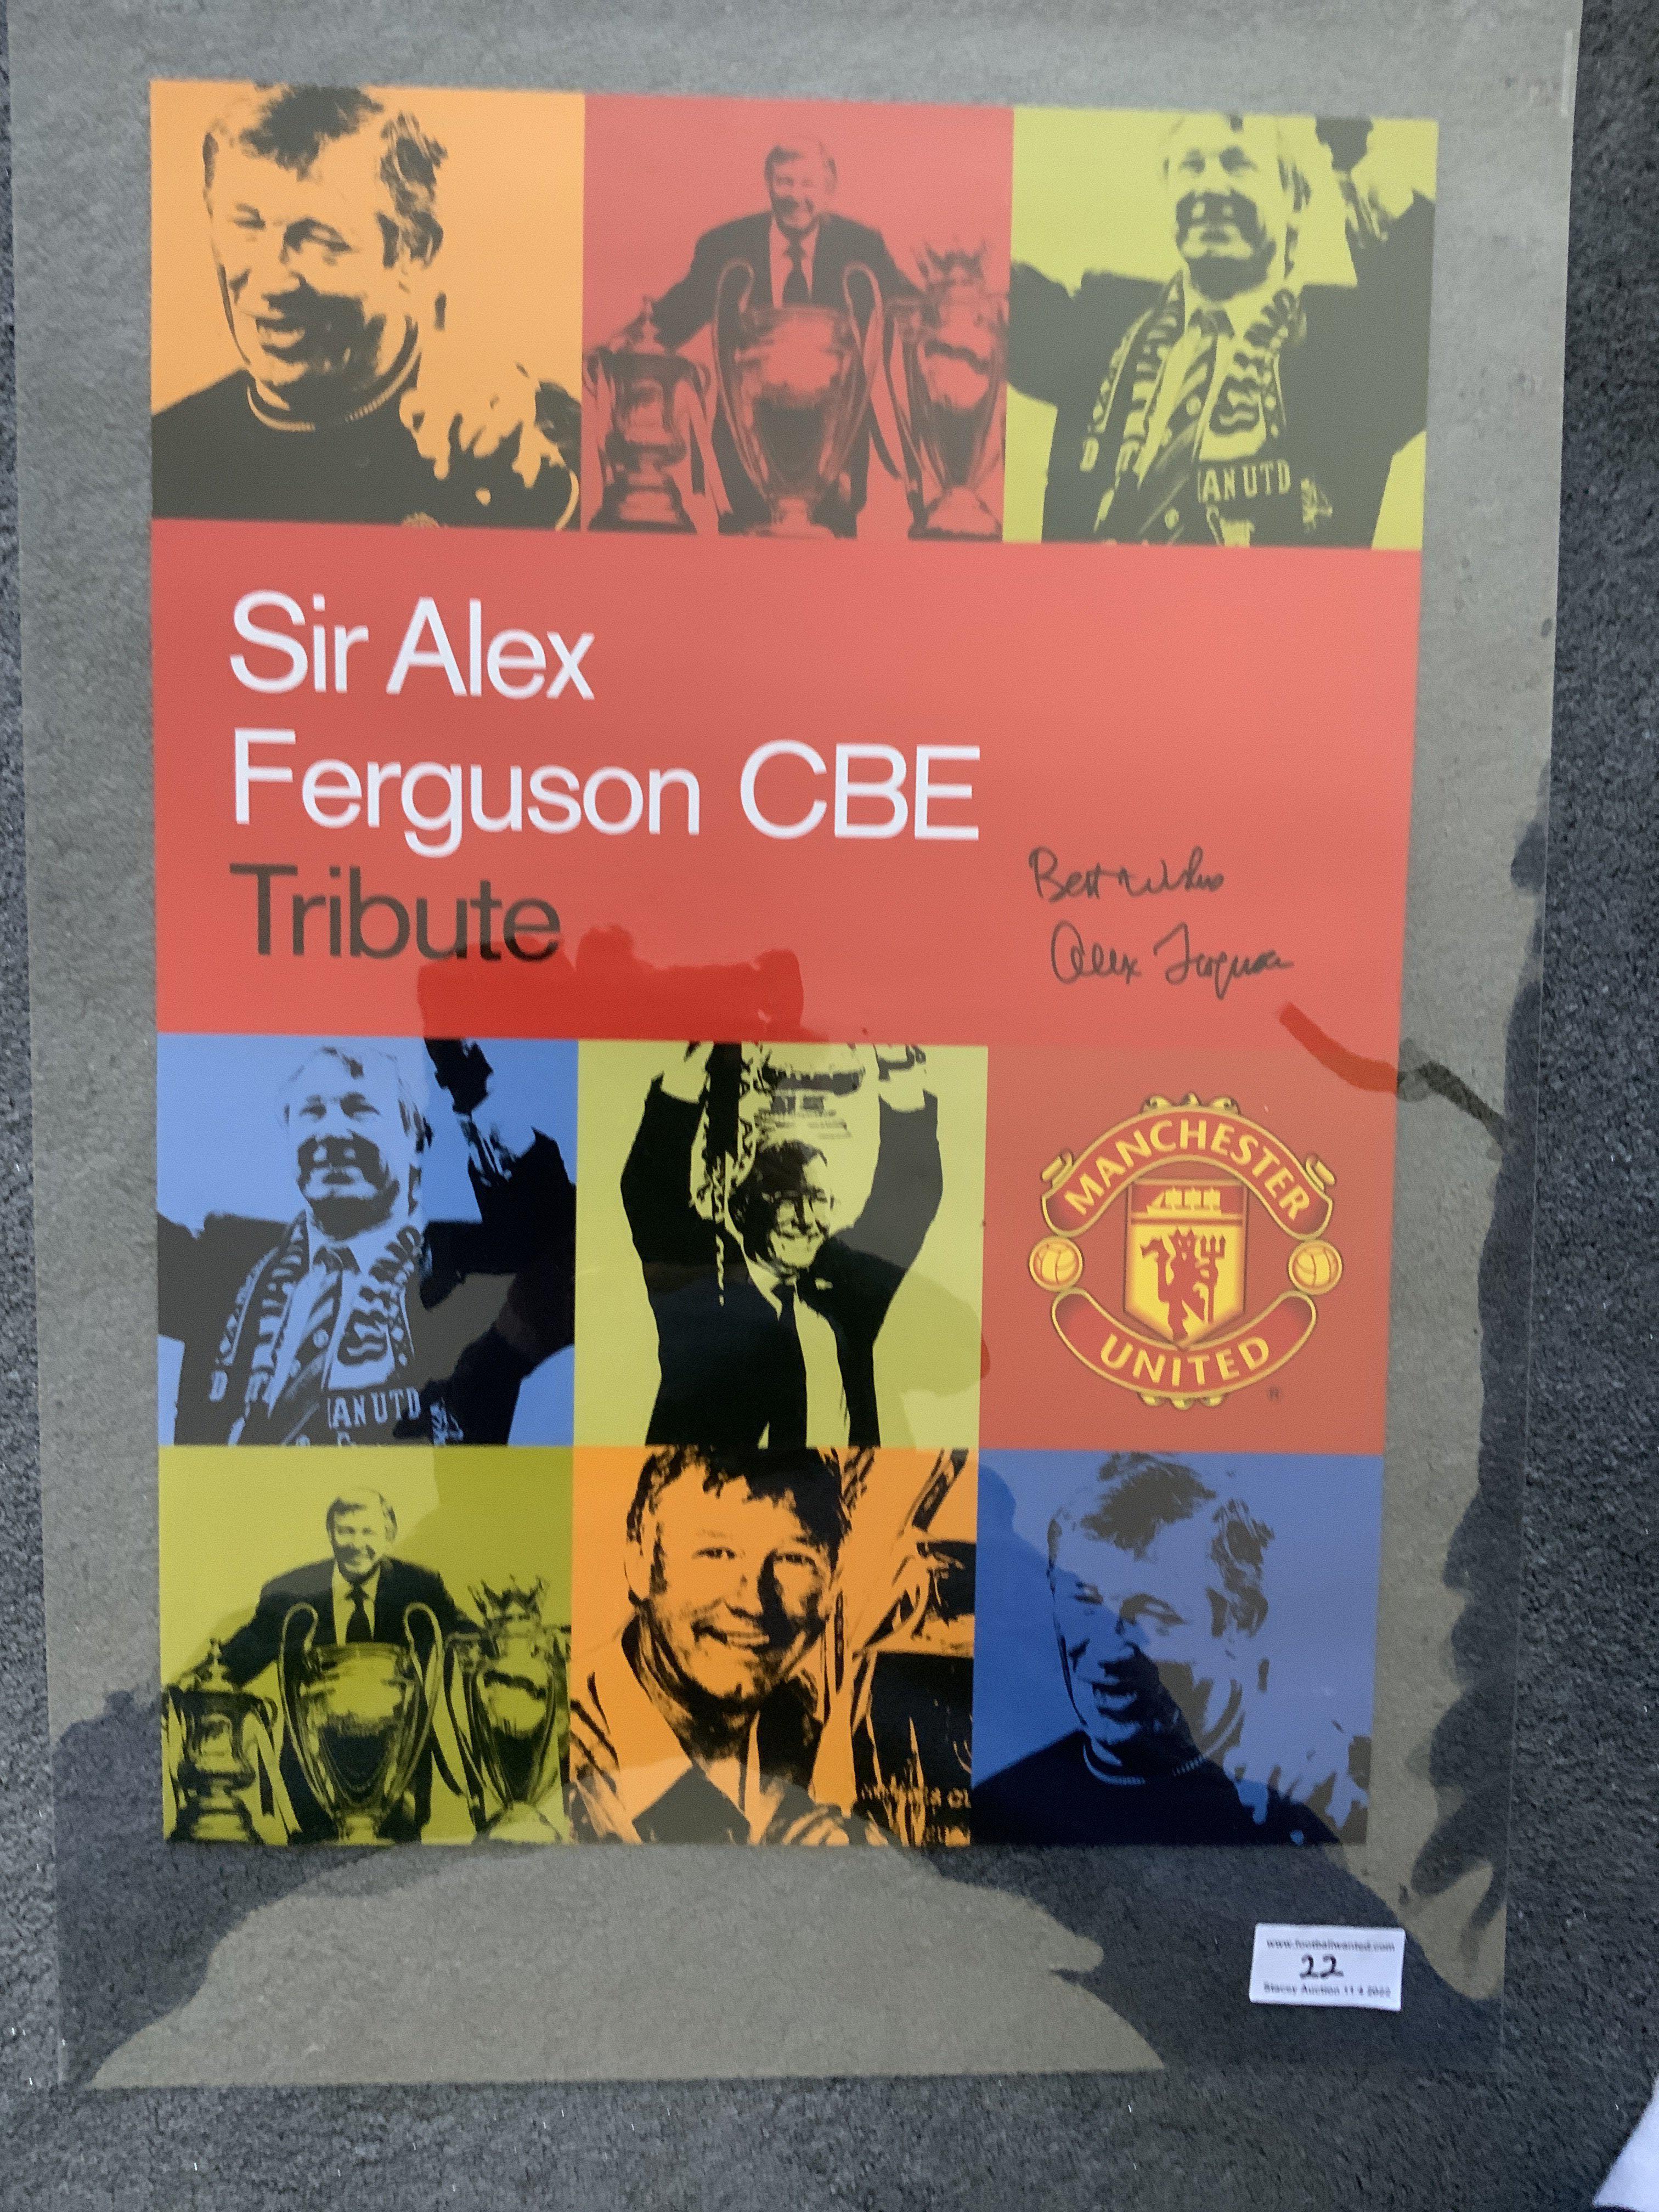 Alex Ferguson Manchester United Signed Tribute Poster: Colourful large (70 x 50cm) poster